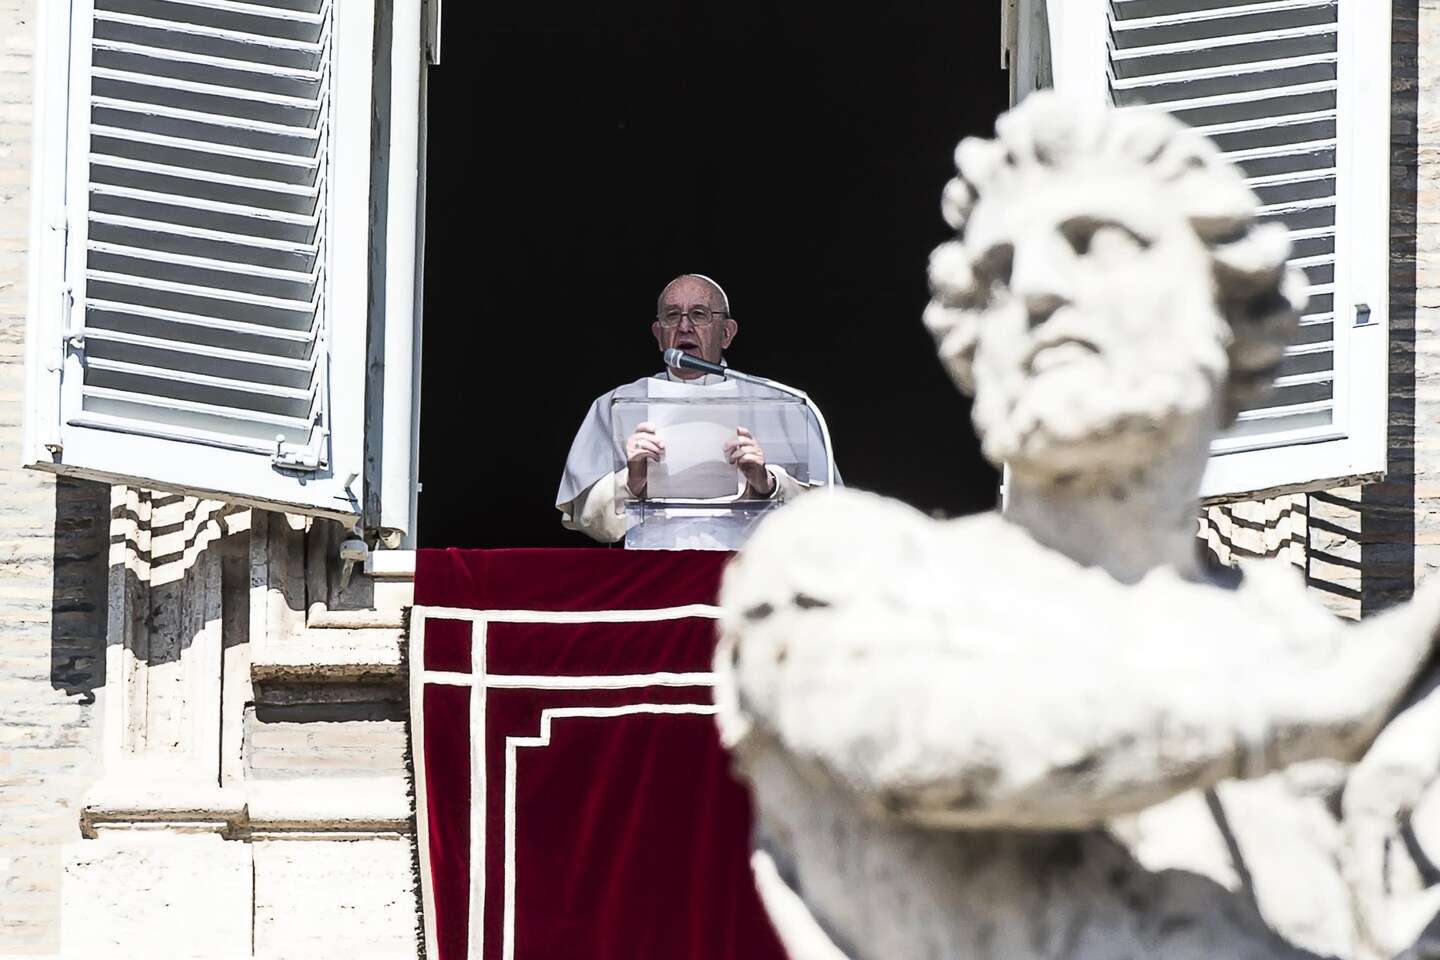 Vatican’s mishandling of high-profile abuse cases extends its foremost crisis